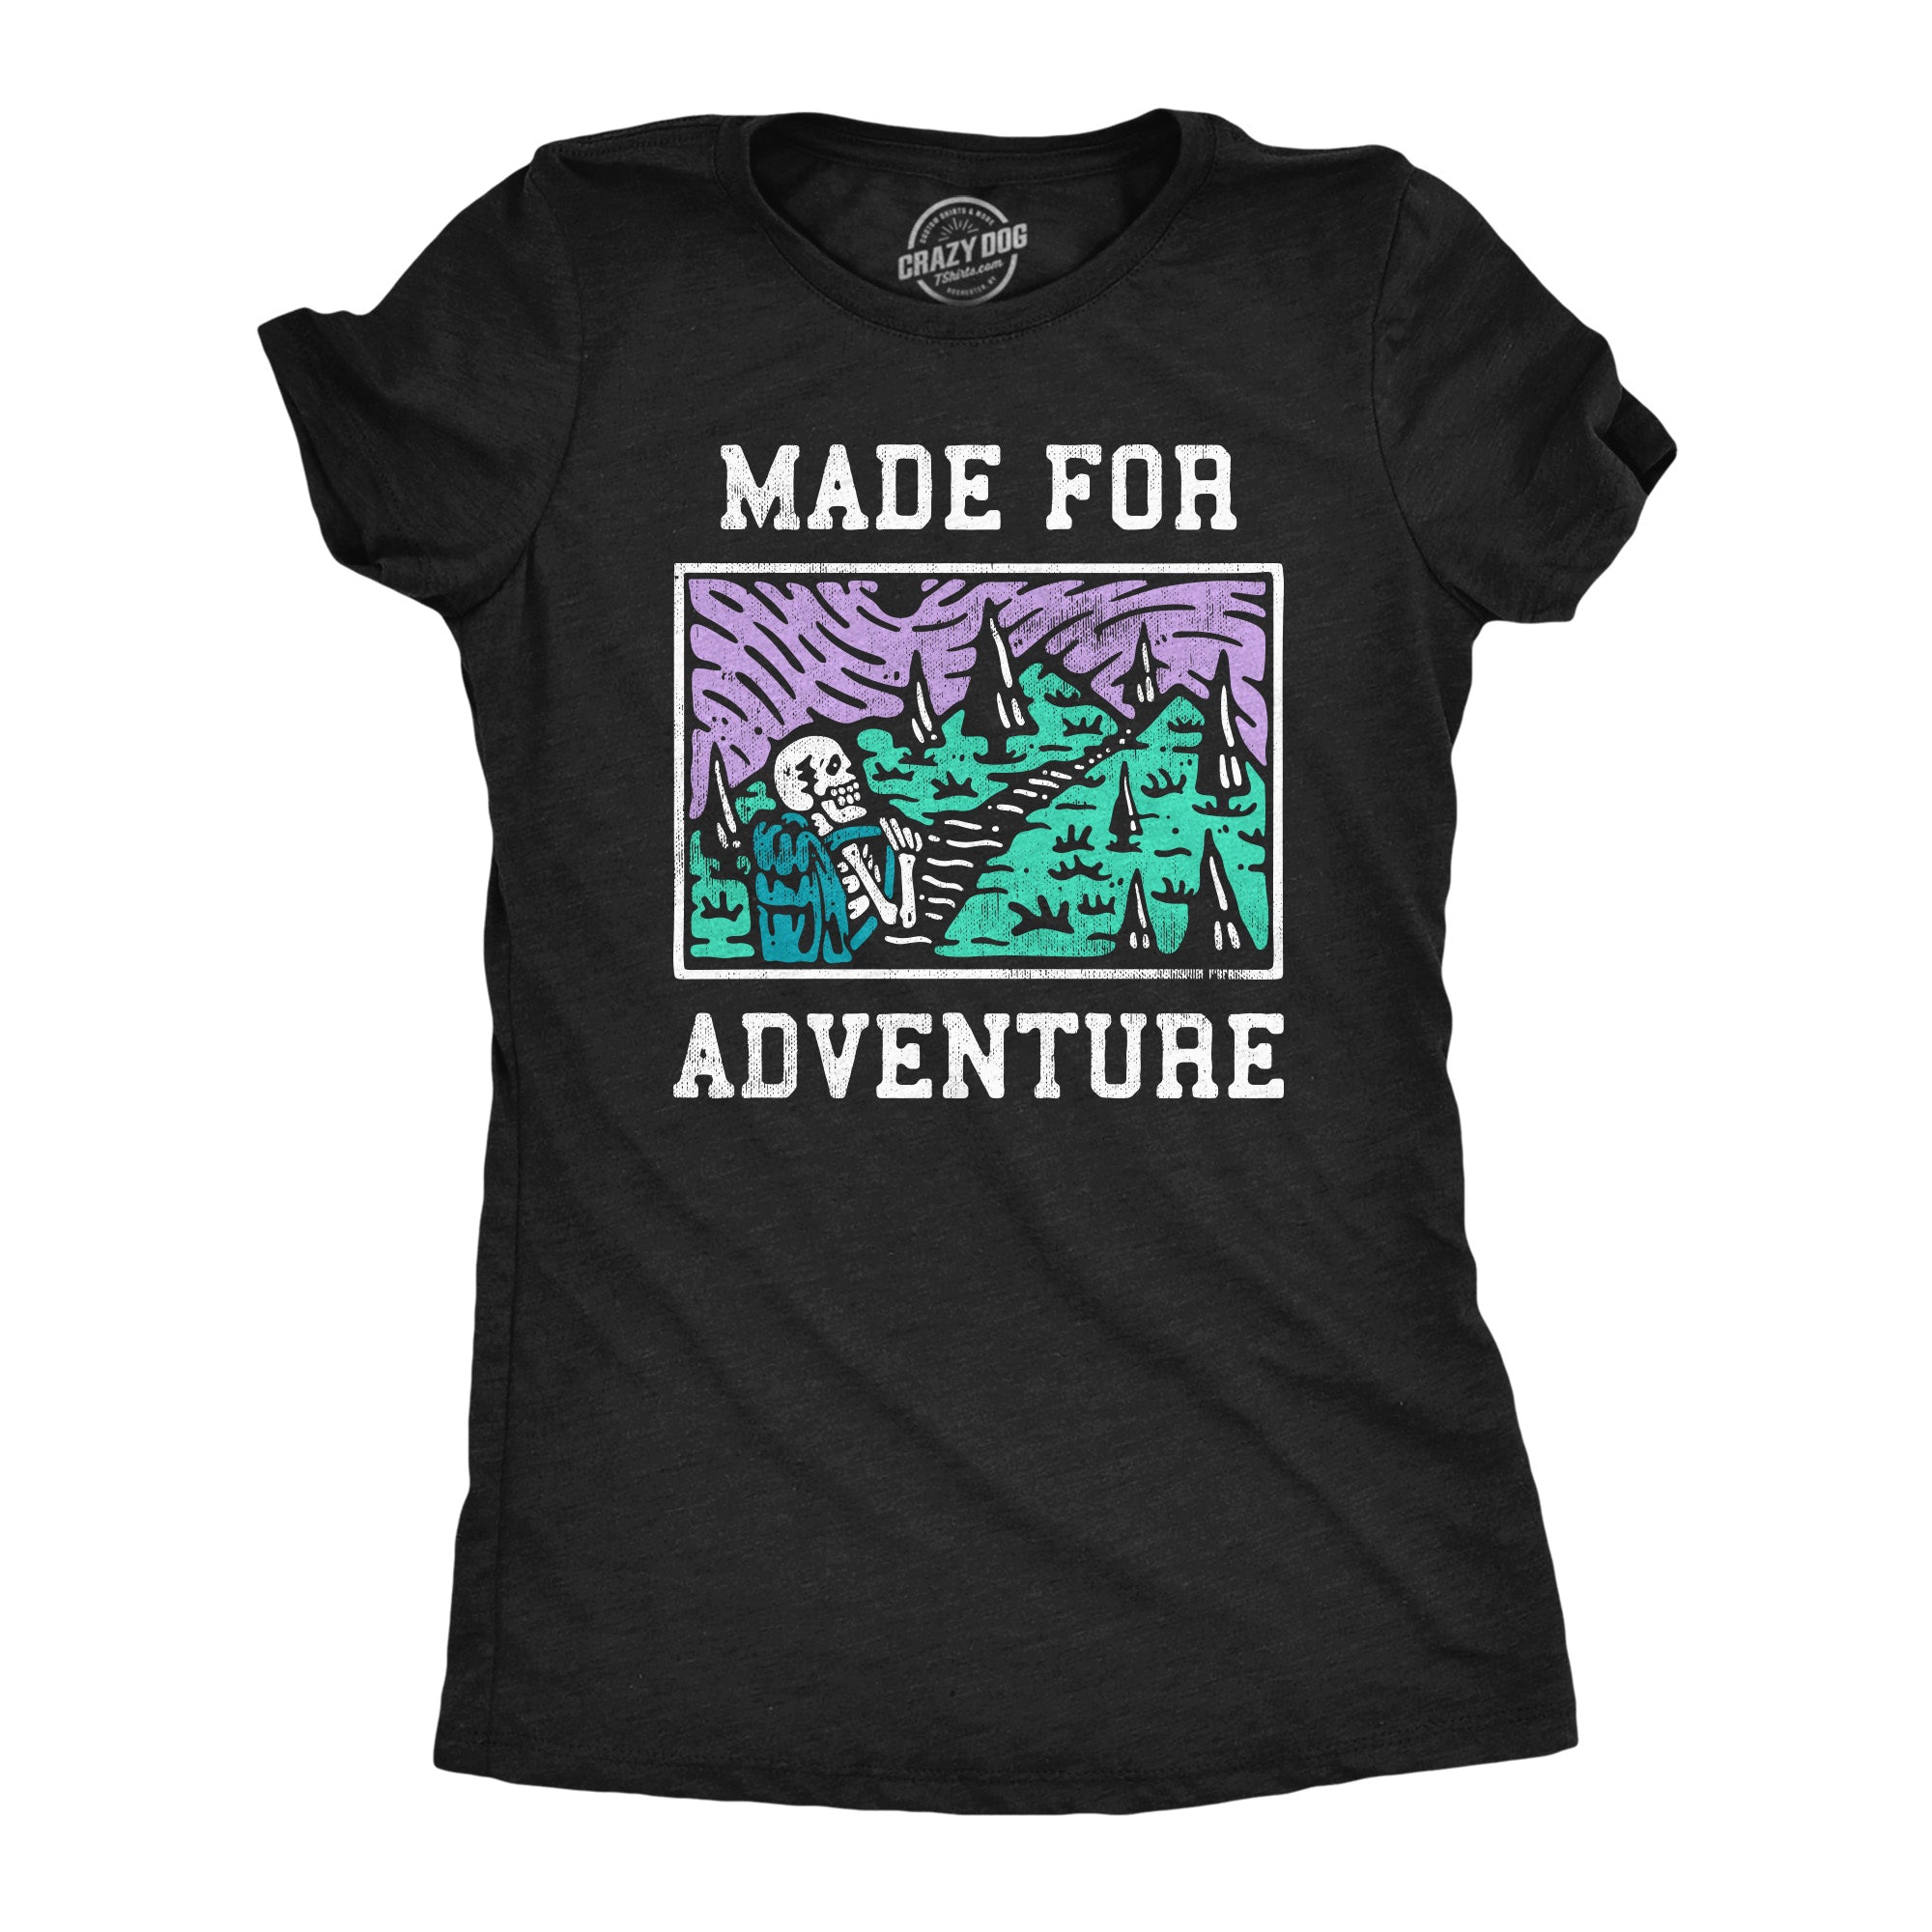 Funny Heather Black - Made For Adventure Made For Adventure Womens T Shirt Nerdy Camping Tee